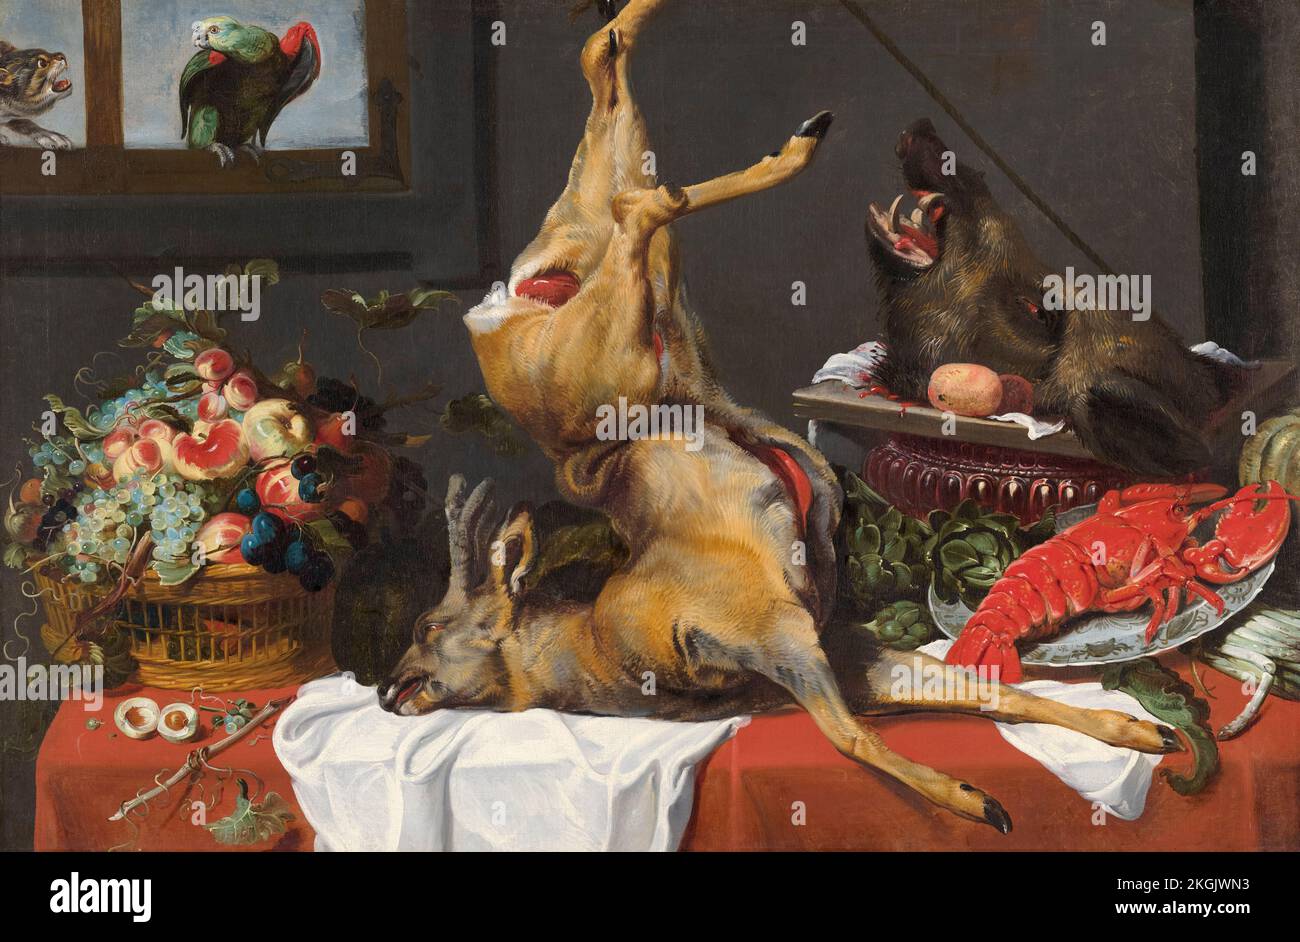 Workshop of Frans Snyders, Still Life with a Dead Stag, painting in oil on canvas, circa 1650 Stock Photo